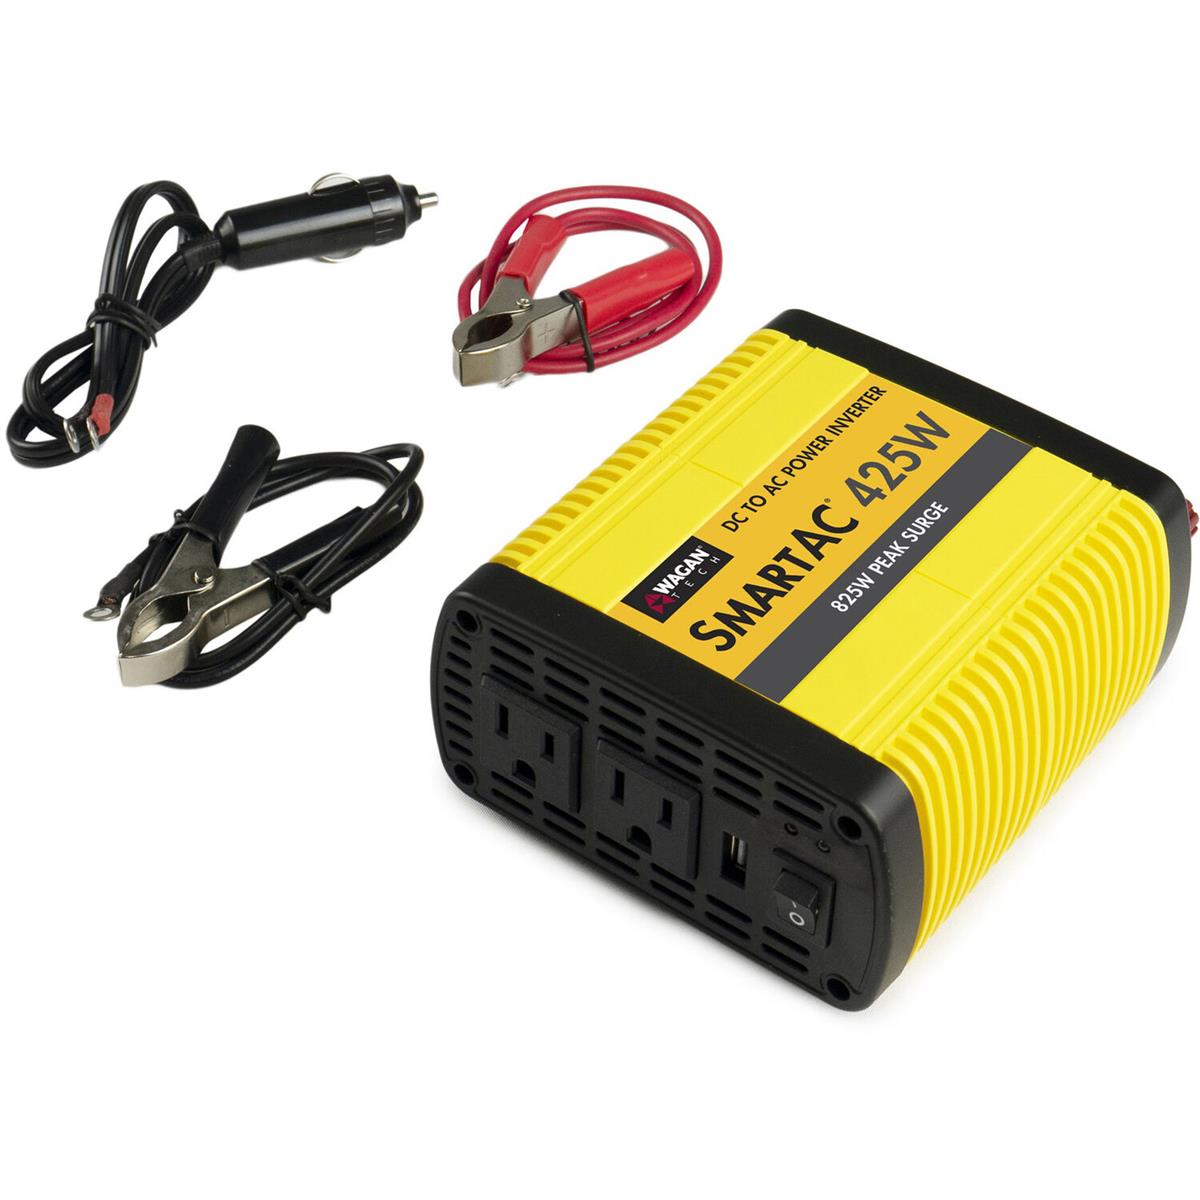 Image of Wagan Smart AC 425W DC to AC Power Inverter